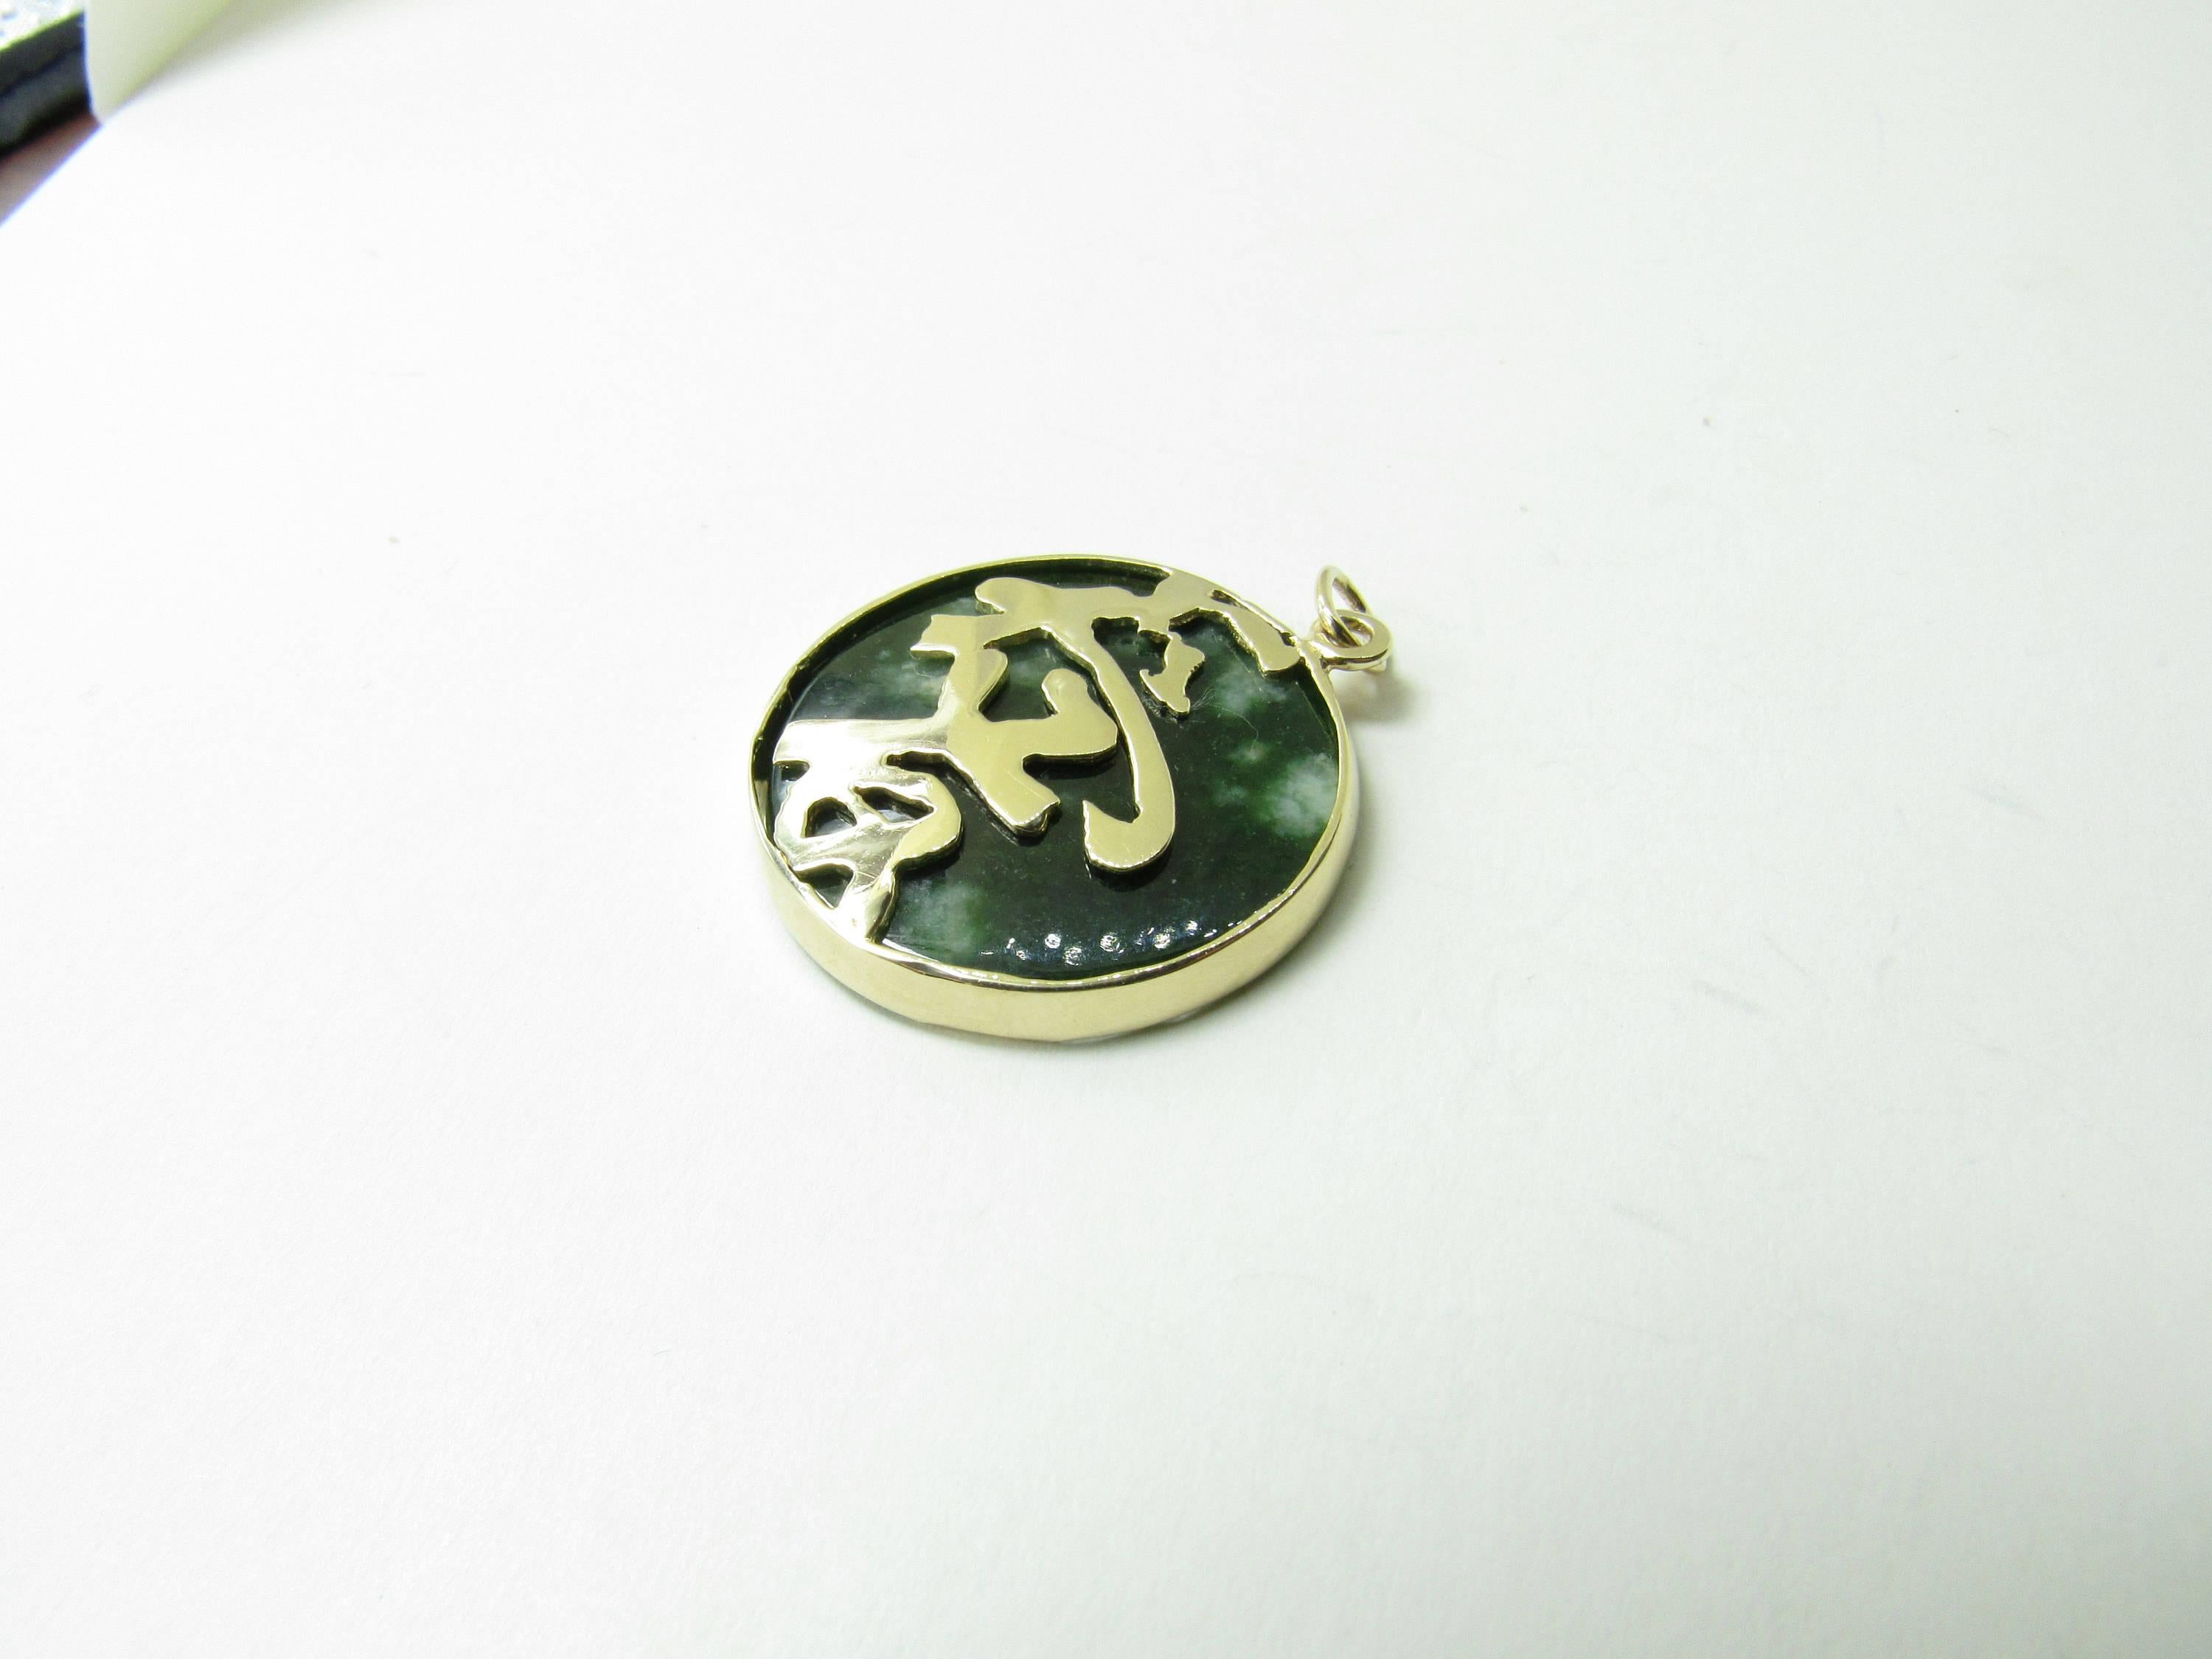 Vintage 14 Karat Yellow Gold and Jade Love Pendant-

This lovely pendant features dark green marbled Jade framed in 14K yellow gold. The Chinese characters for 